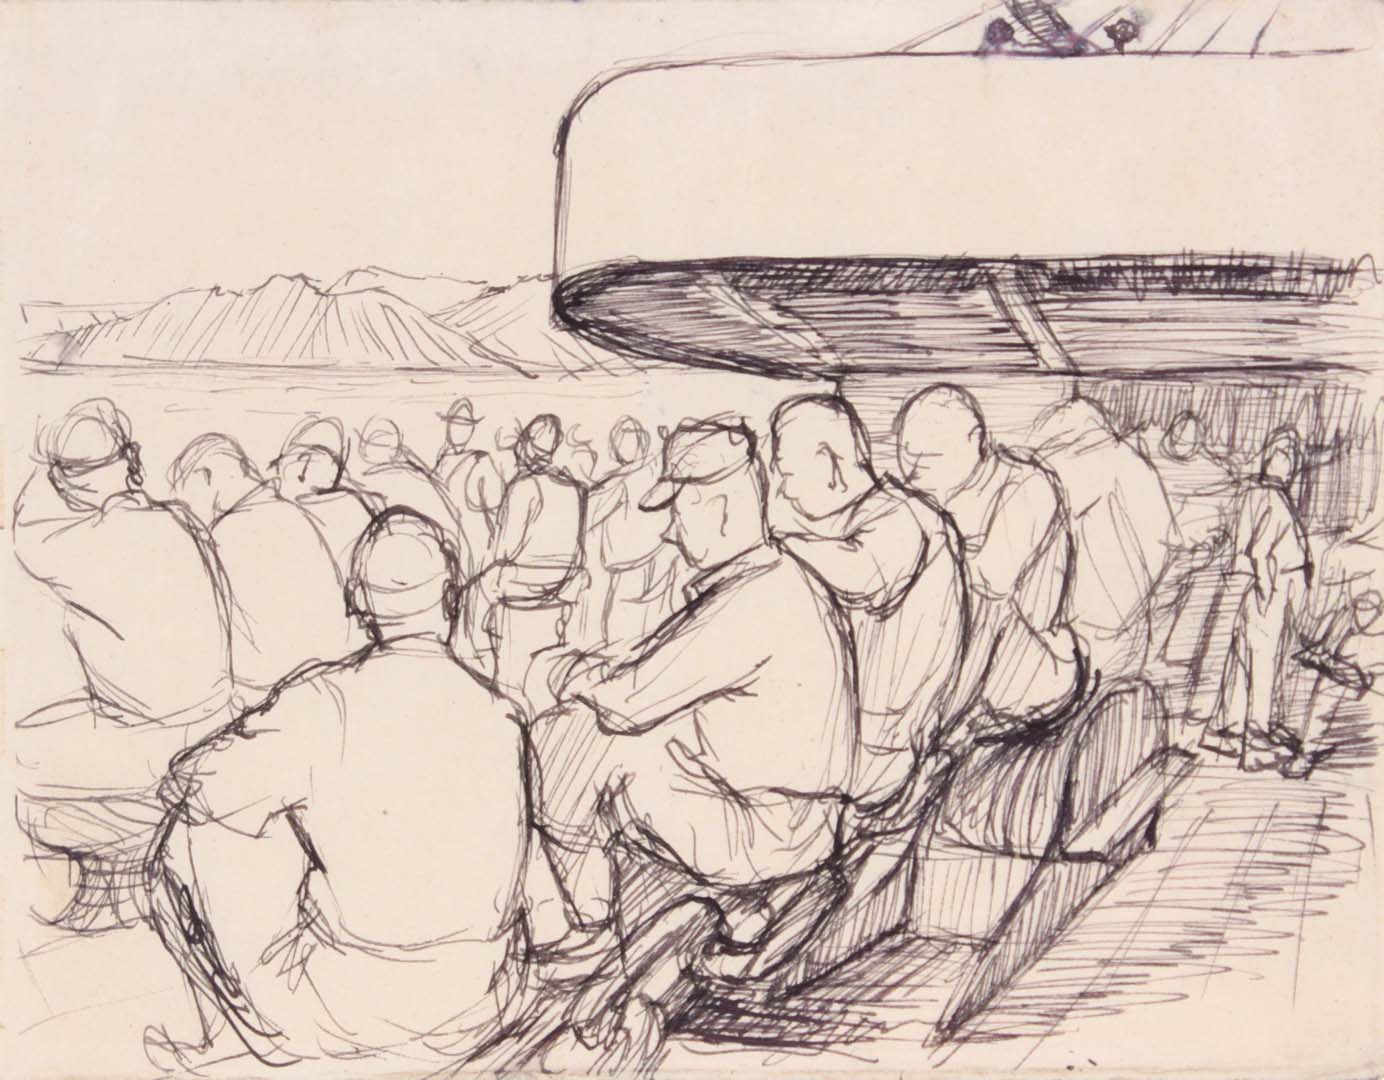 1944 Convoy to Italy II Pen and Ink on Paper 4.8125 x 6.125